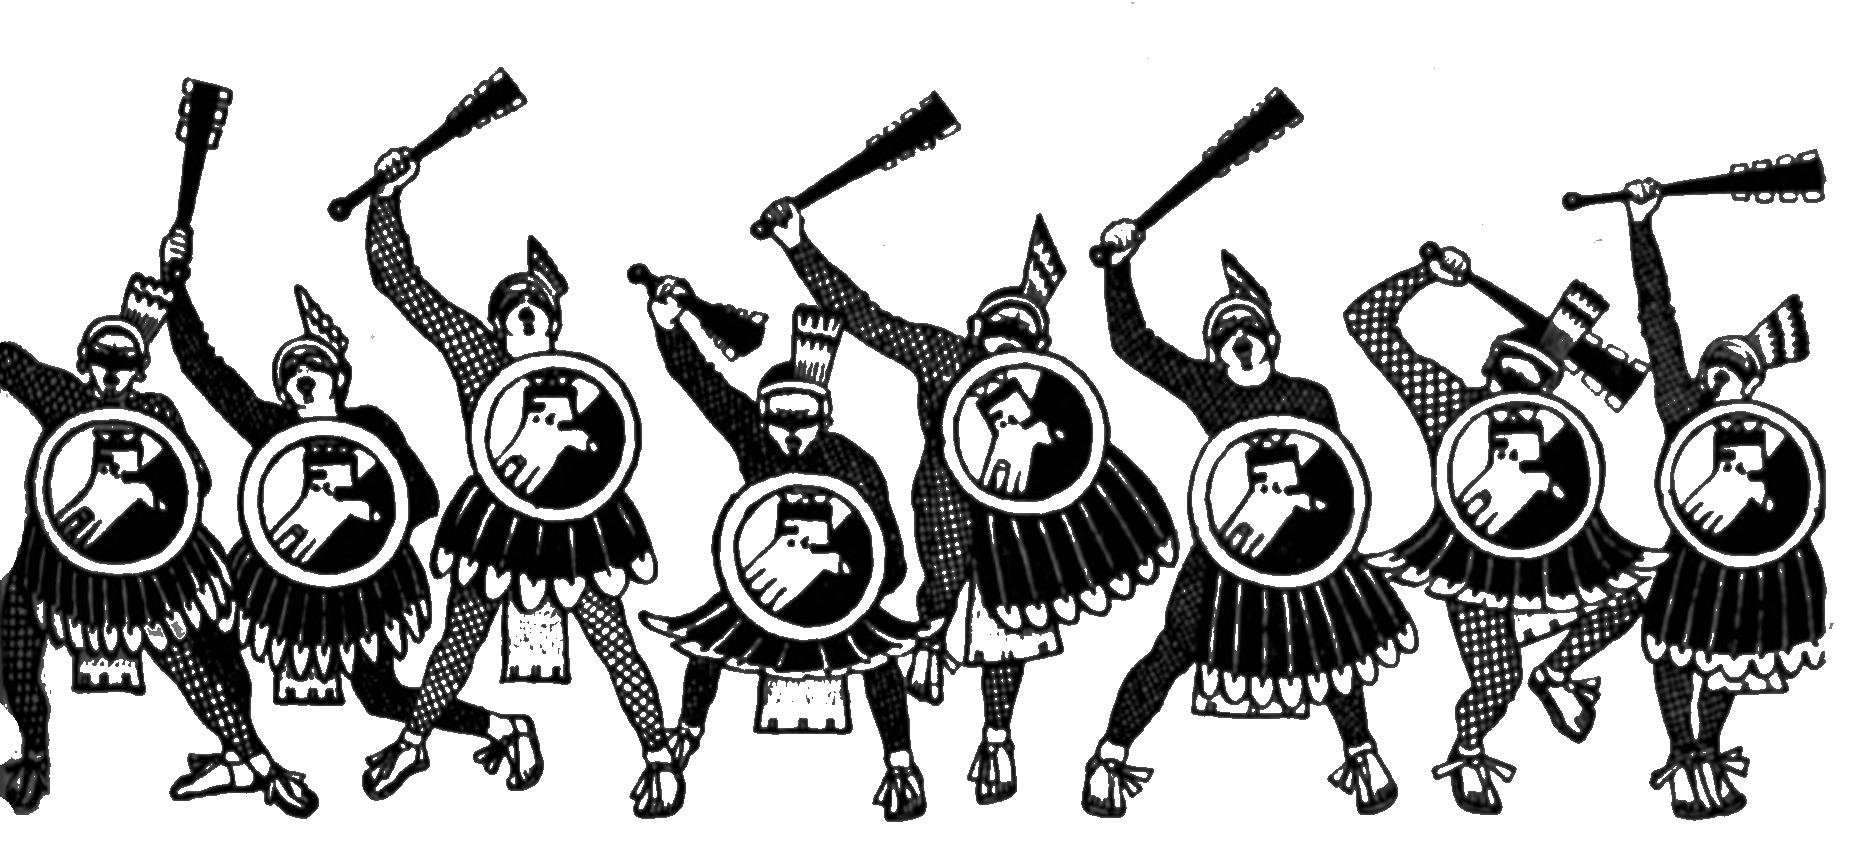 Aztec clipart soldier. The conquest of mexico